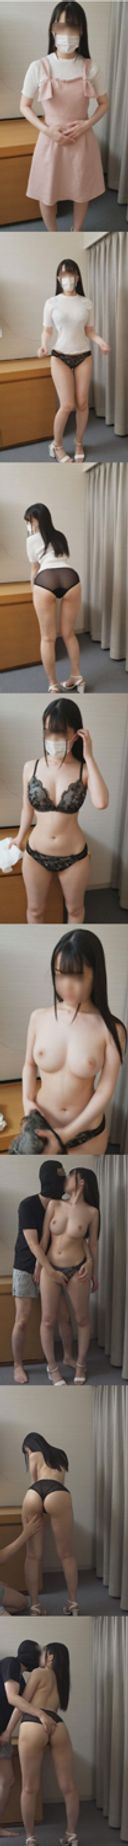 [Exclusive Original] Japan An 18-year-old college student with an erotic curve of the buttocks from around the waist, and a beautiful girl with beautiful young beautiful skin, beautiful breasts, and a beautiful girl (the disadvantage is a little bad at) A naked body that wants to lick around at least once in your life